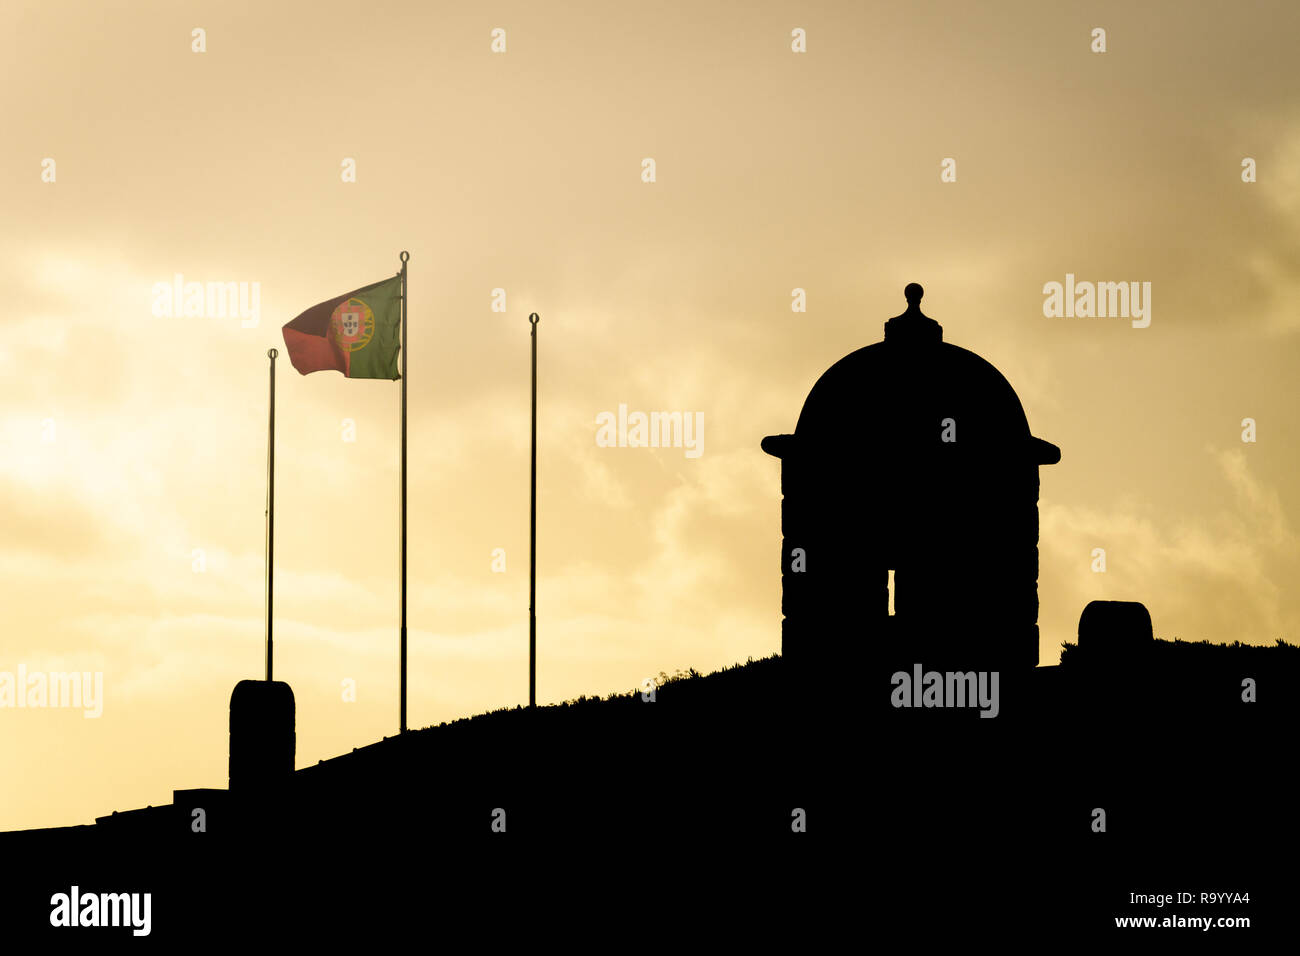 Silhouette of a small castle with a portuguese flag waving in the wind. Sunset. Copy space. Stock Photo